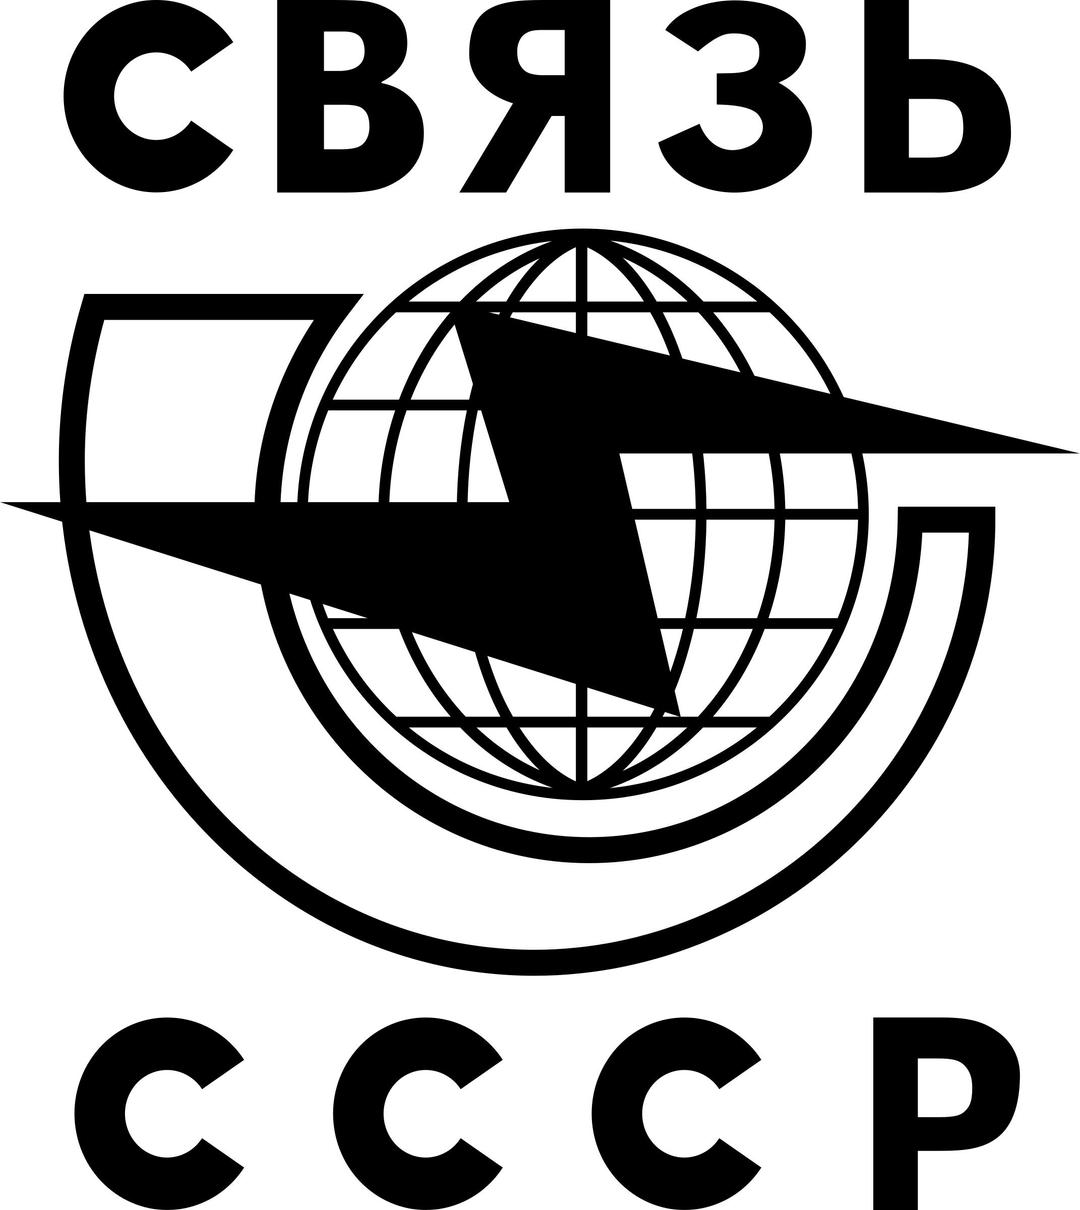 Communications of the USSR png transparent